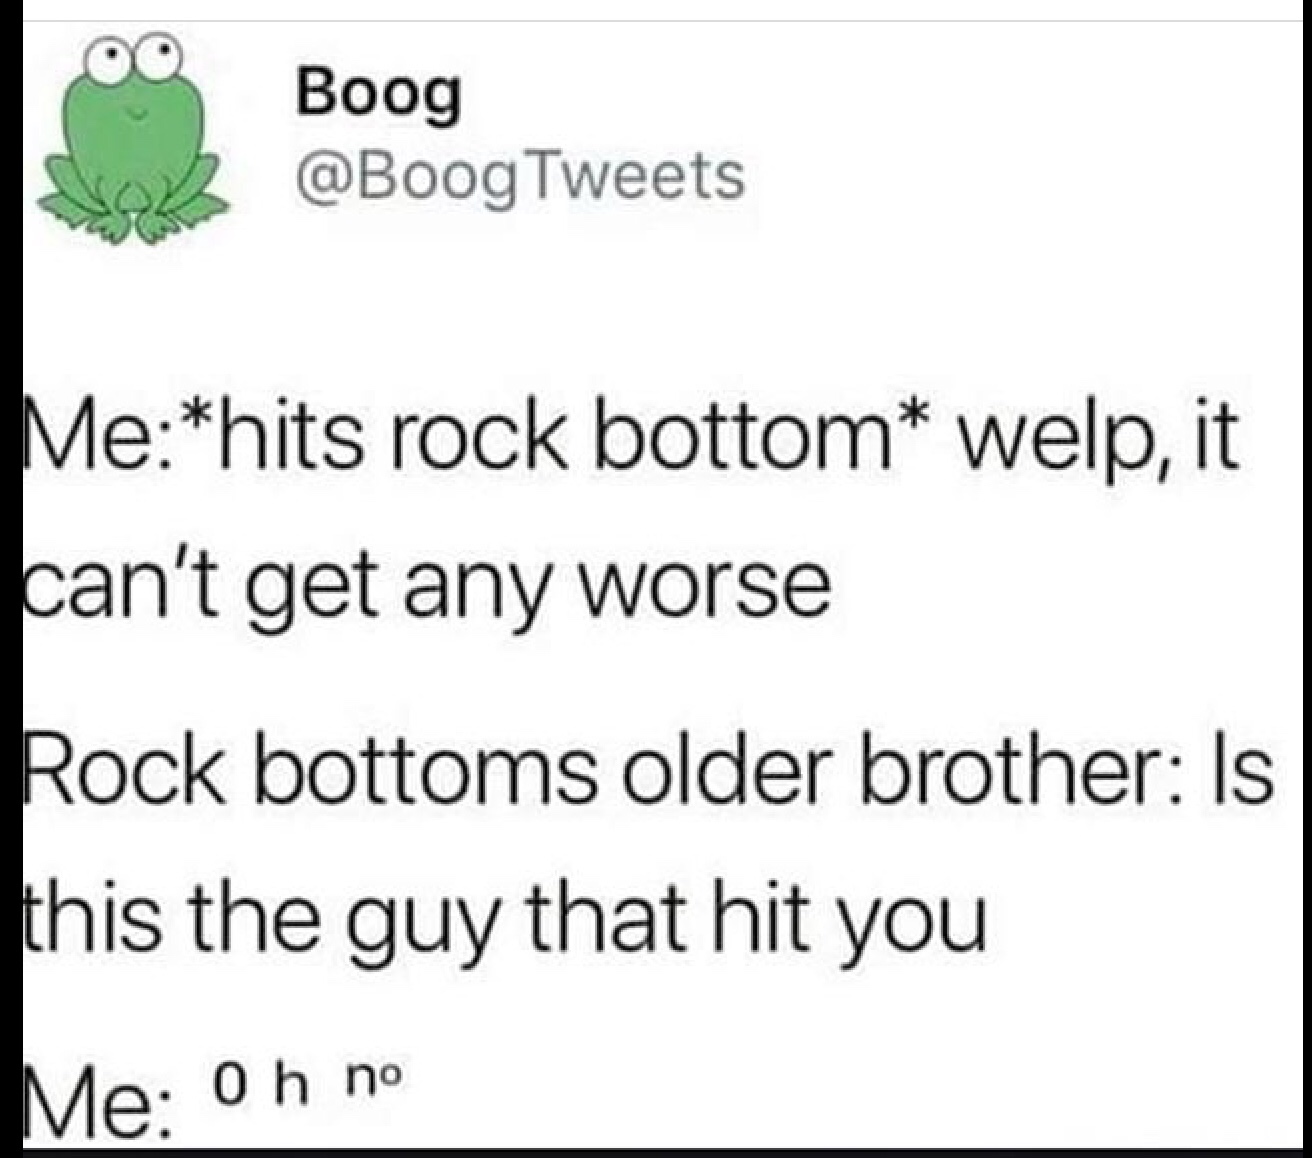 handwriting - Boog Tweets Mehits rock bottom welp, it can't get any worse Rock bottoms older brother Is this the guy that hit you Me Oh no